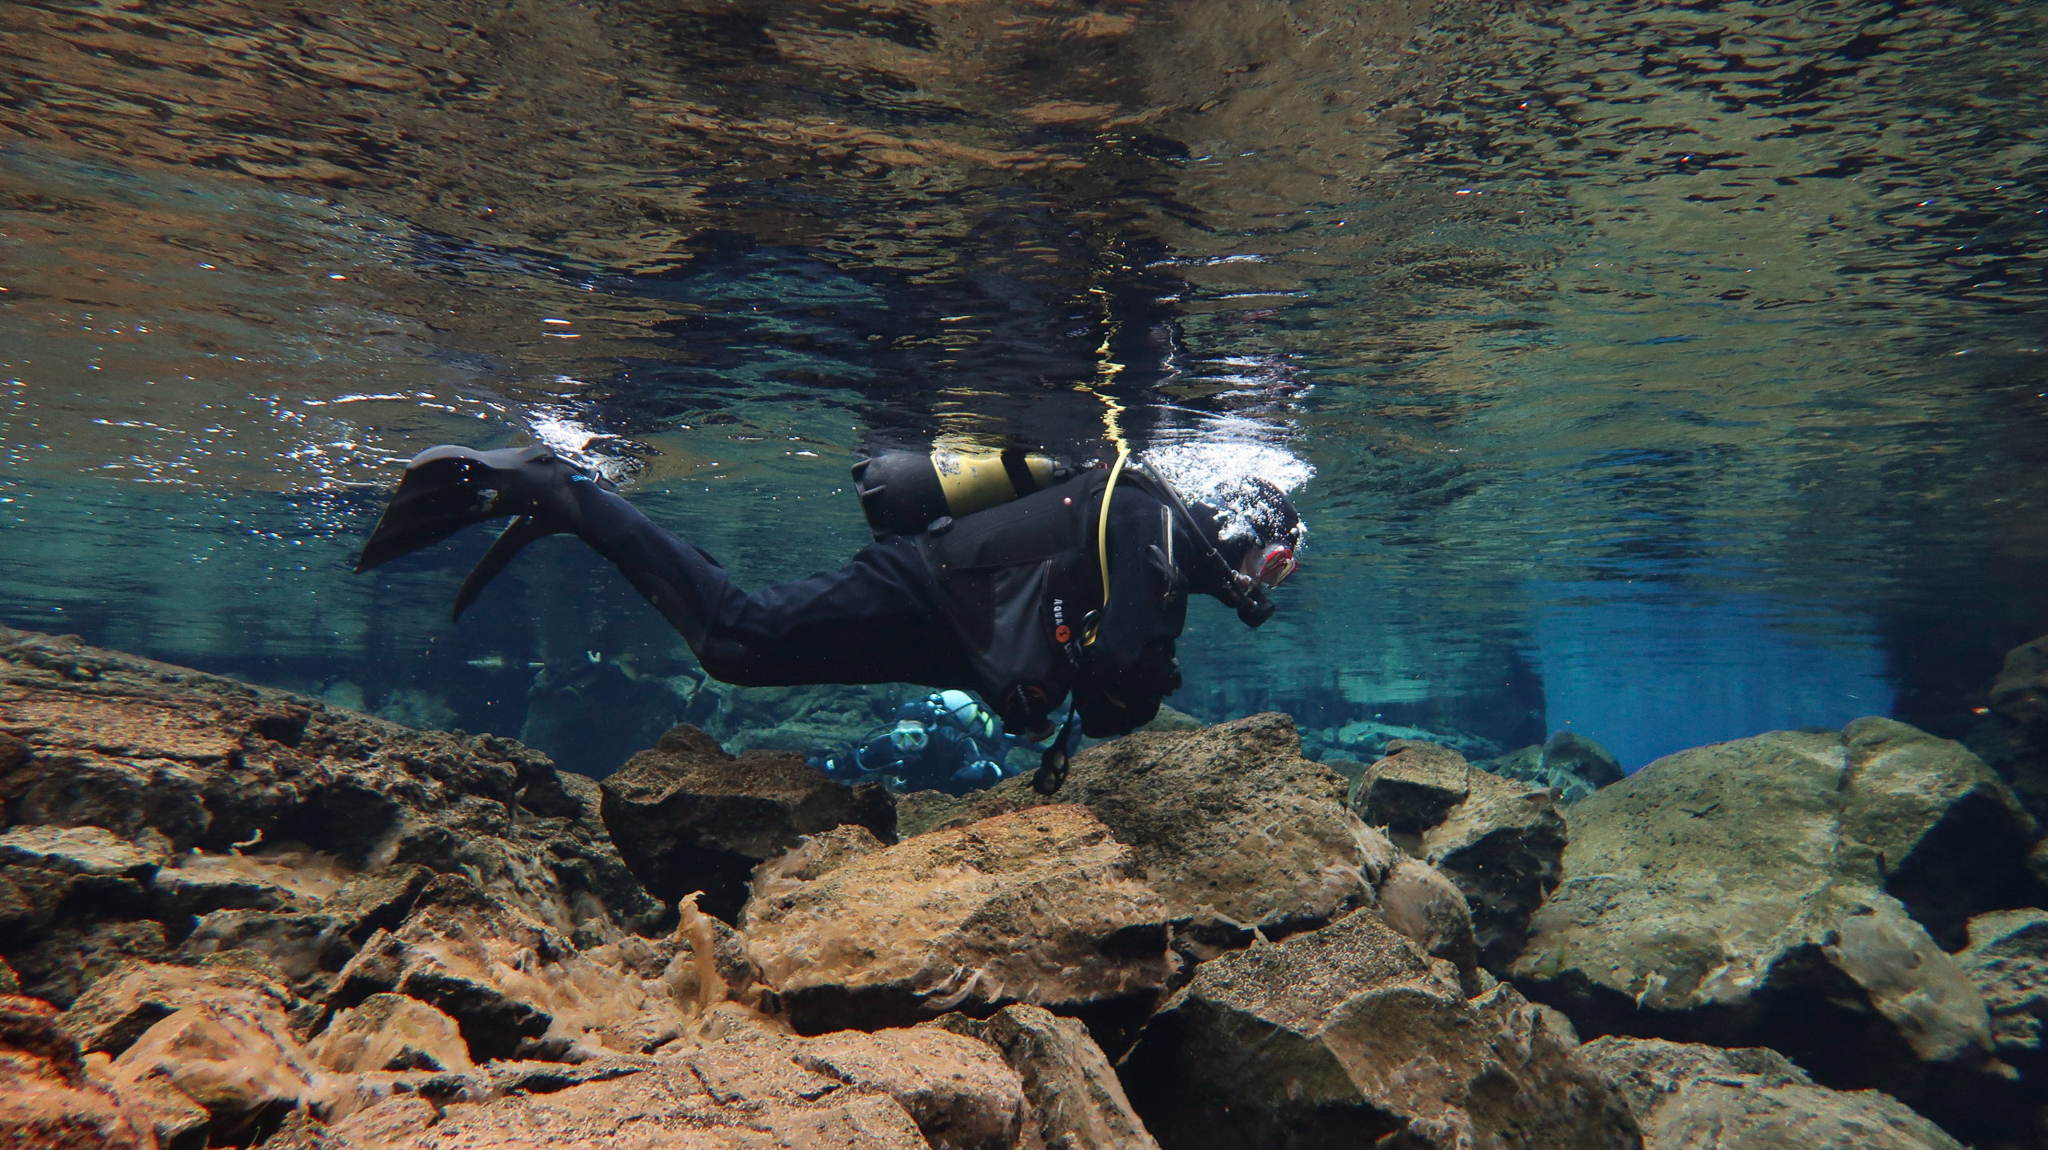 One of the shallow sections at Silfra Fissure in Thingvellir National Park, Iceland. Photo by Tania Roque of DIVE.IS